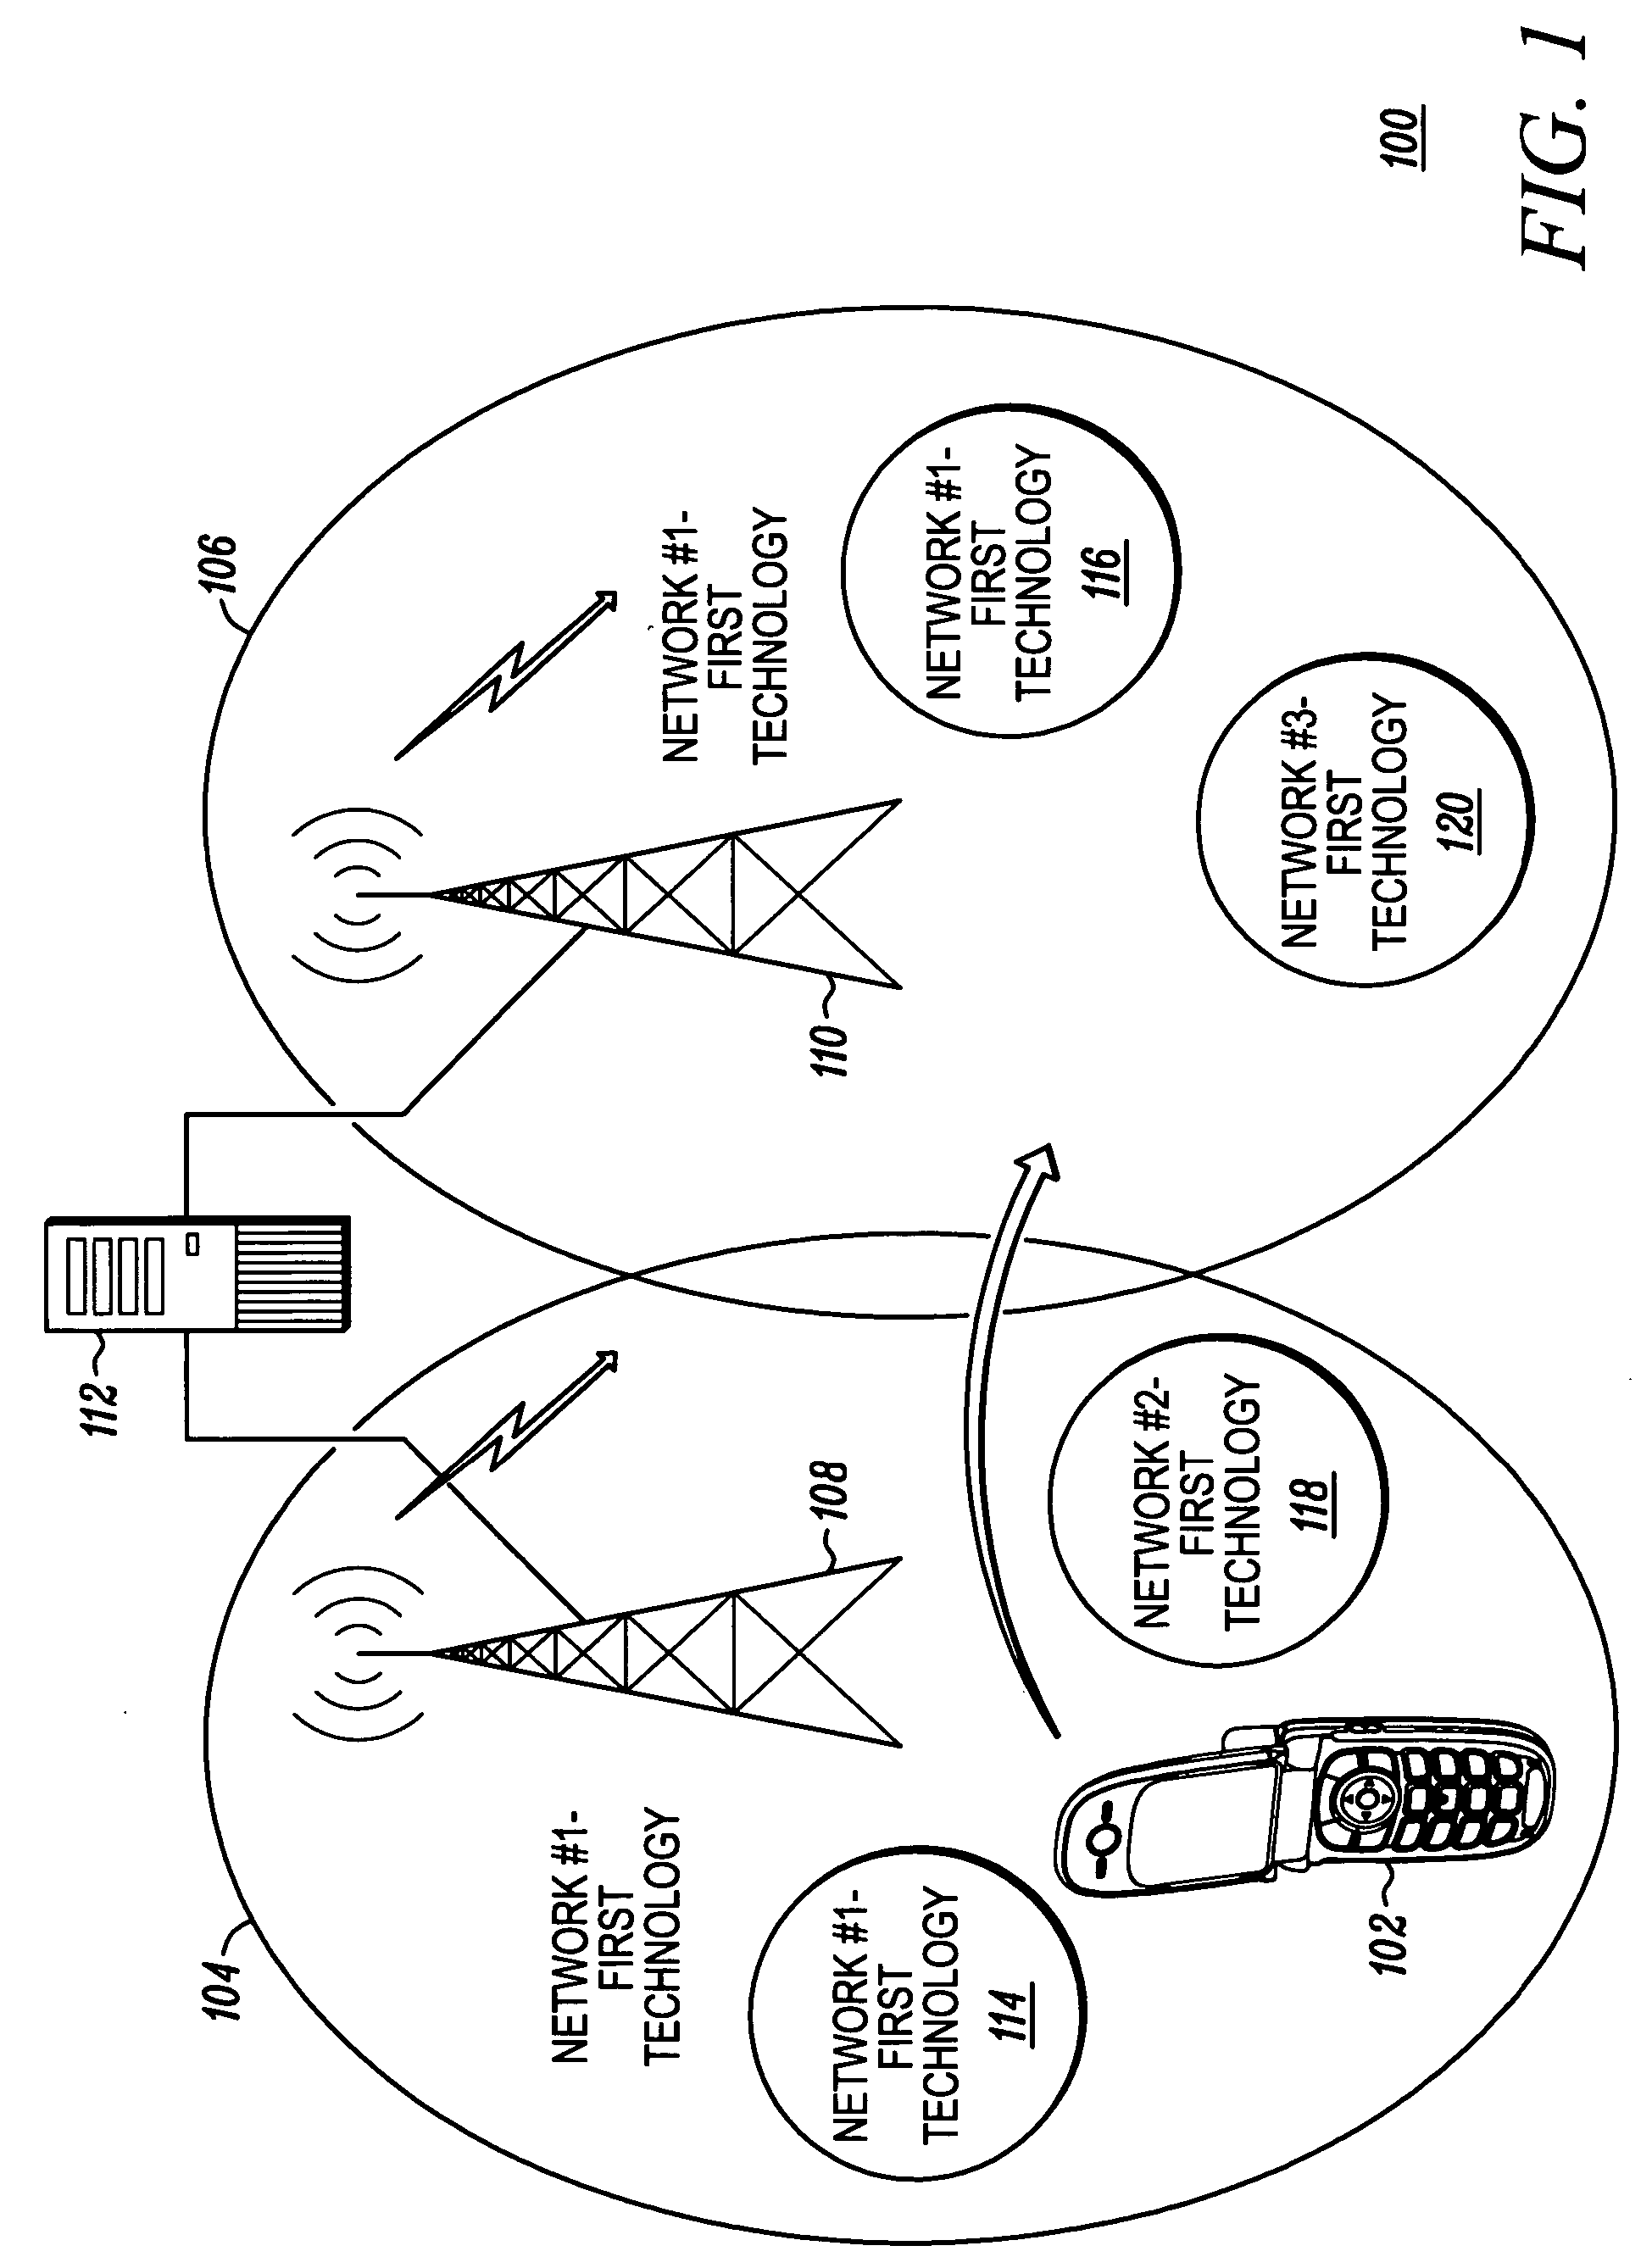 System and method for determining availability of radio access technology associated with a wireless network